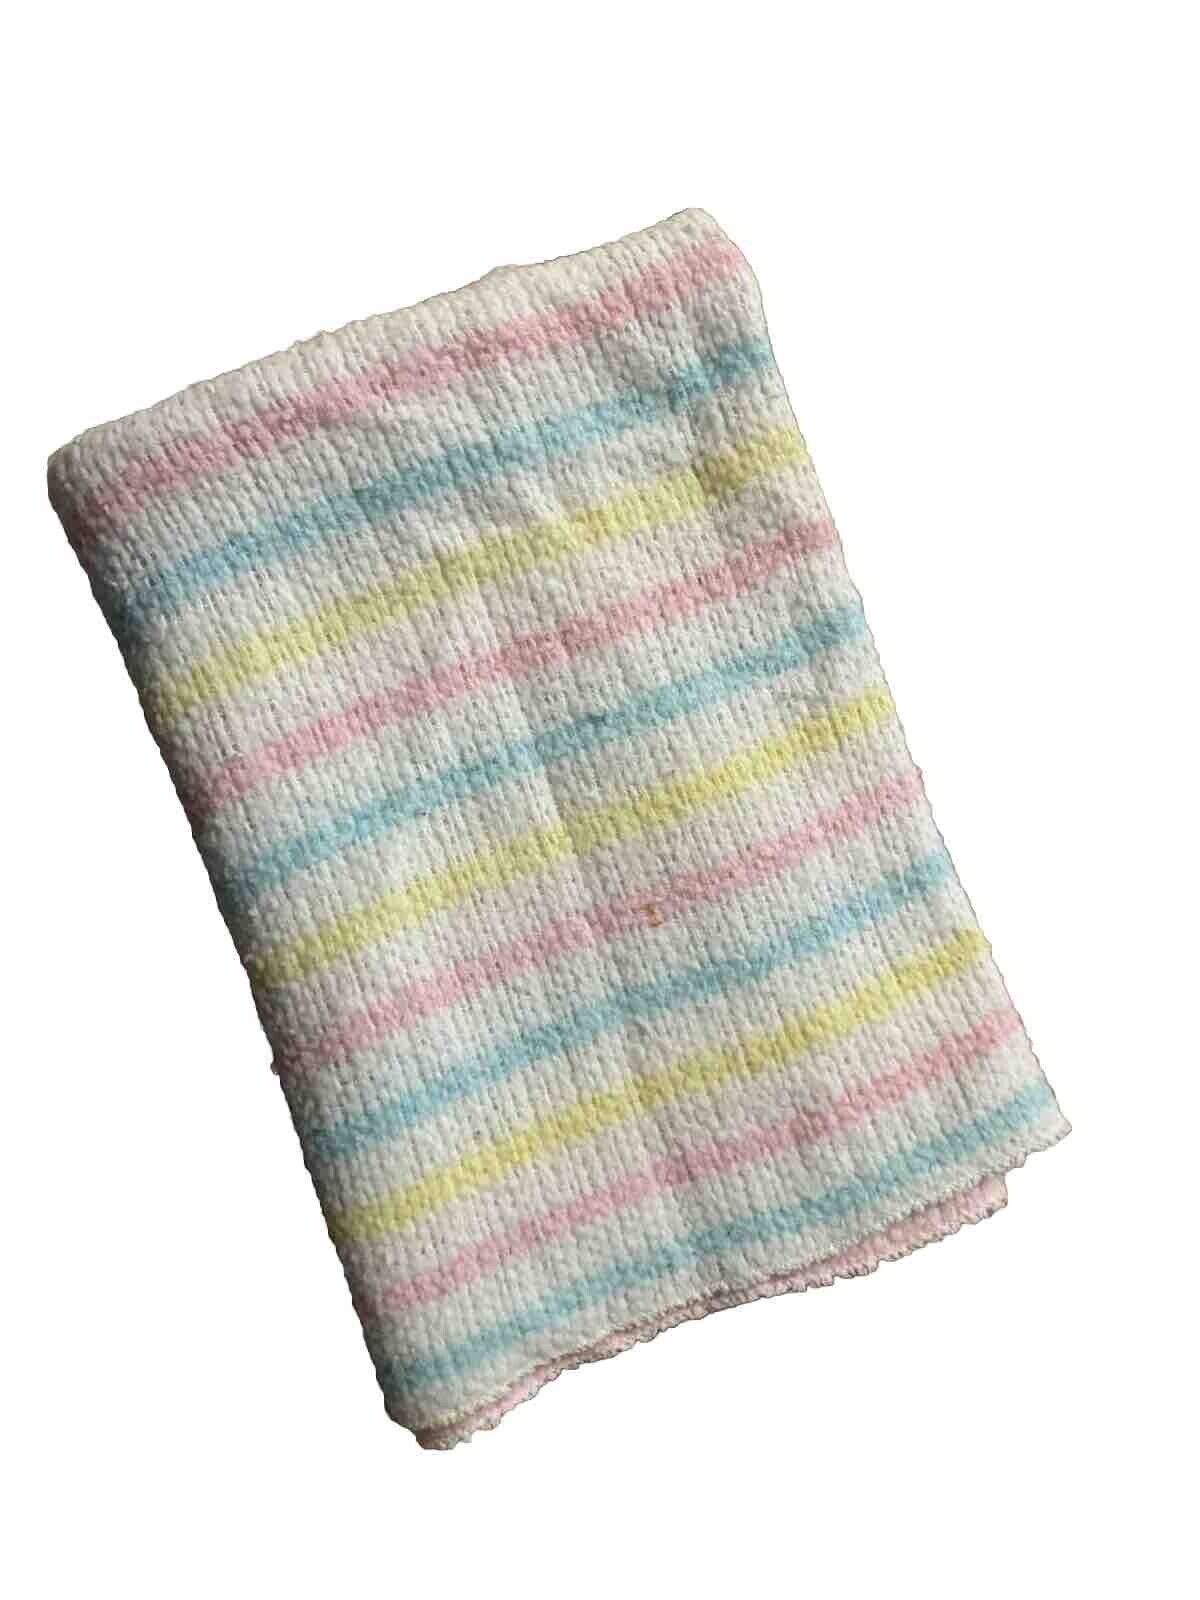 Vintage Baby Blanket Woven Pink Blue Yellow Striped 29 X 34 Acrylic Unisex